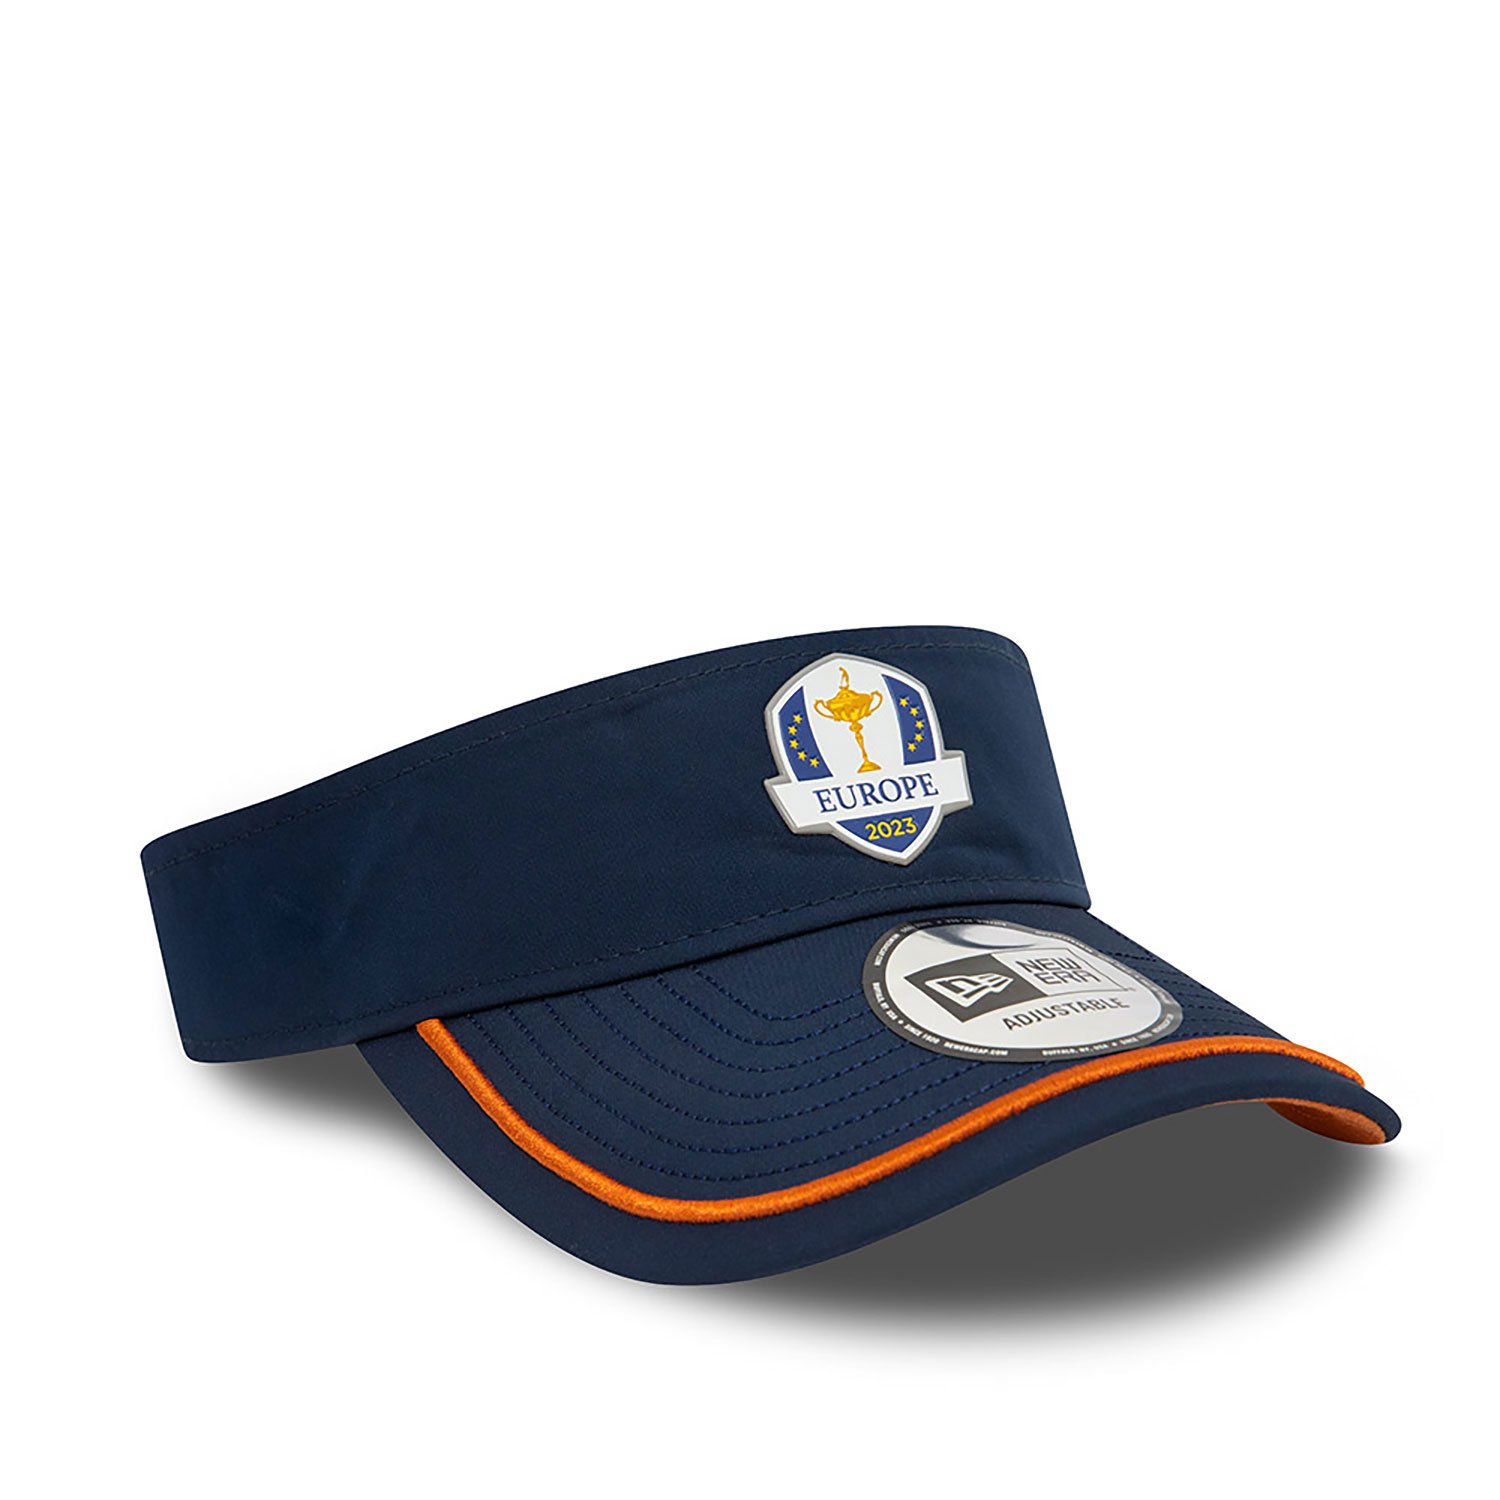 Ryder Cup Europe 2023 Saturday Competition Day Navy Visor Cap